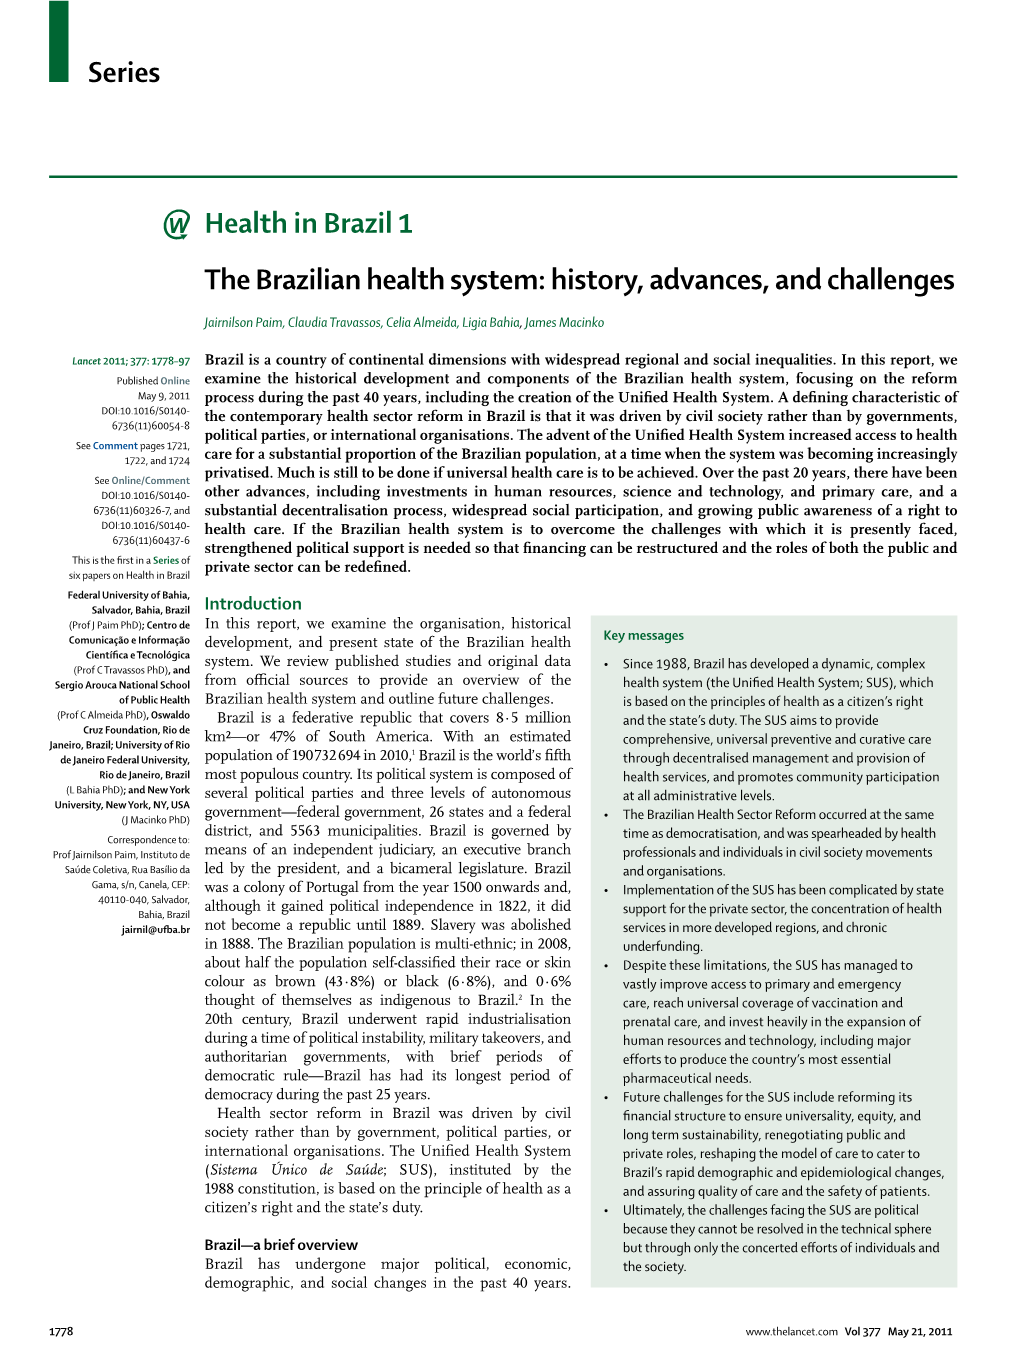 The Brazilian Health System: History, Advances, and Challenges